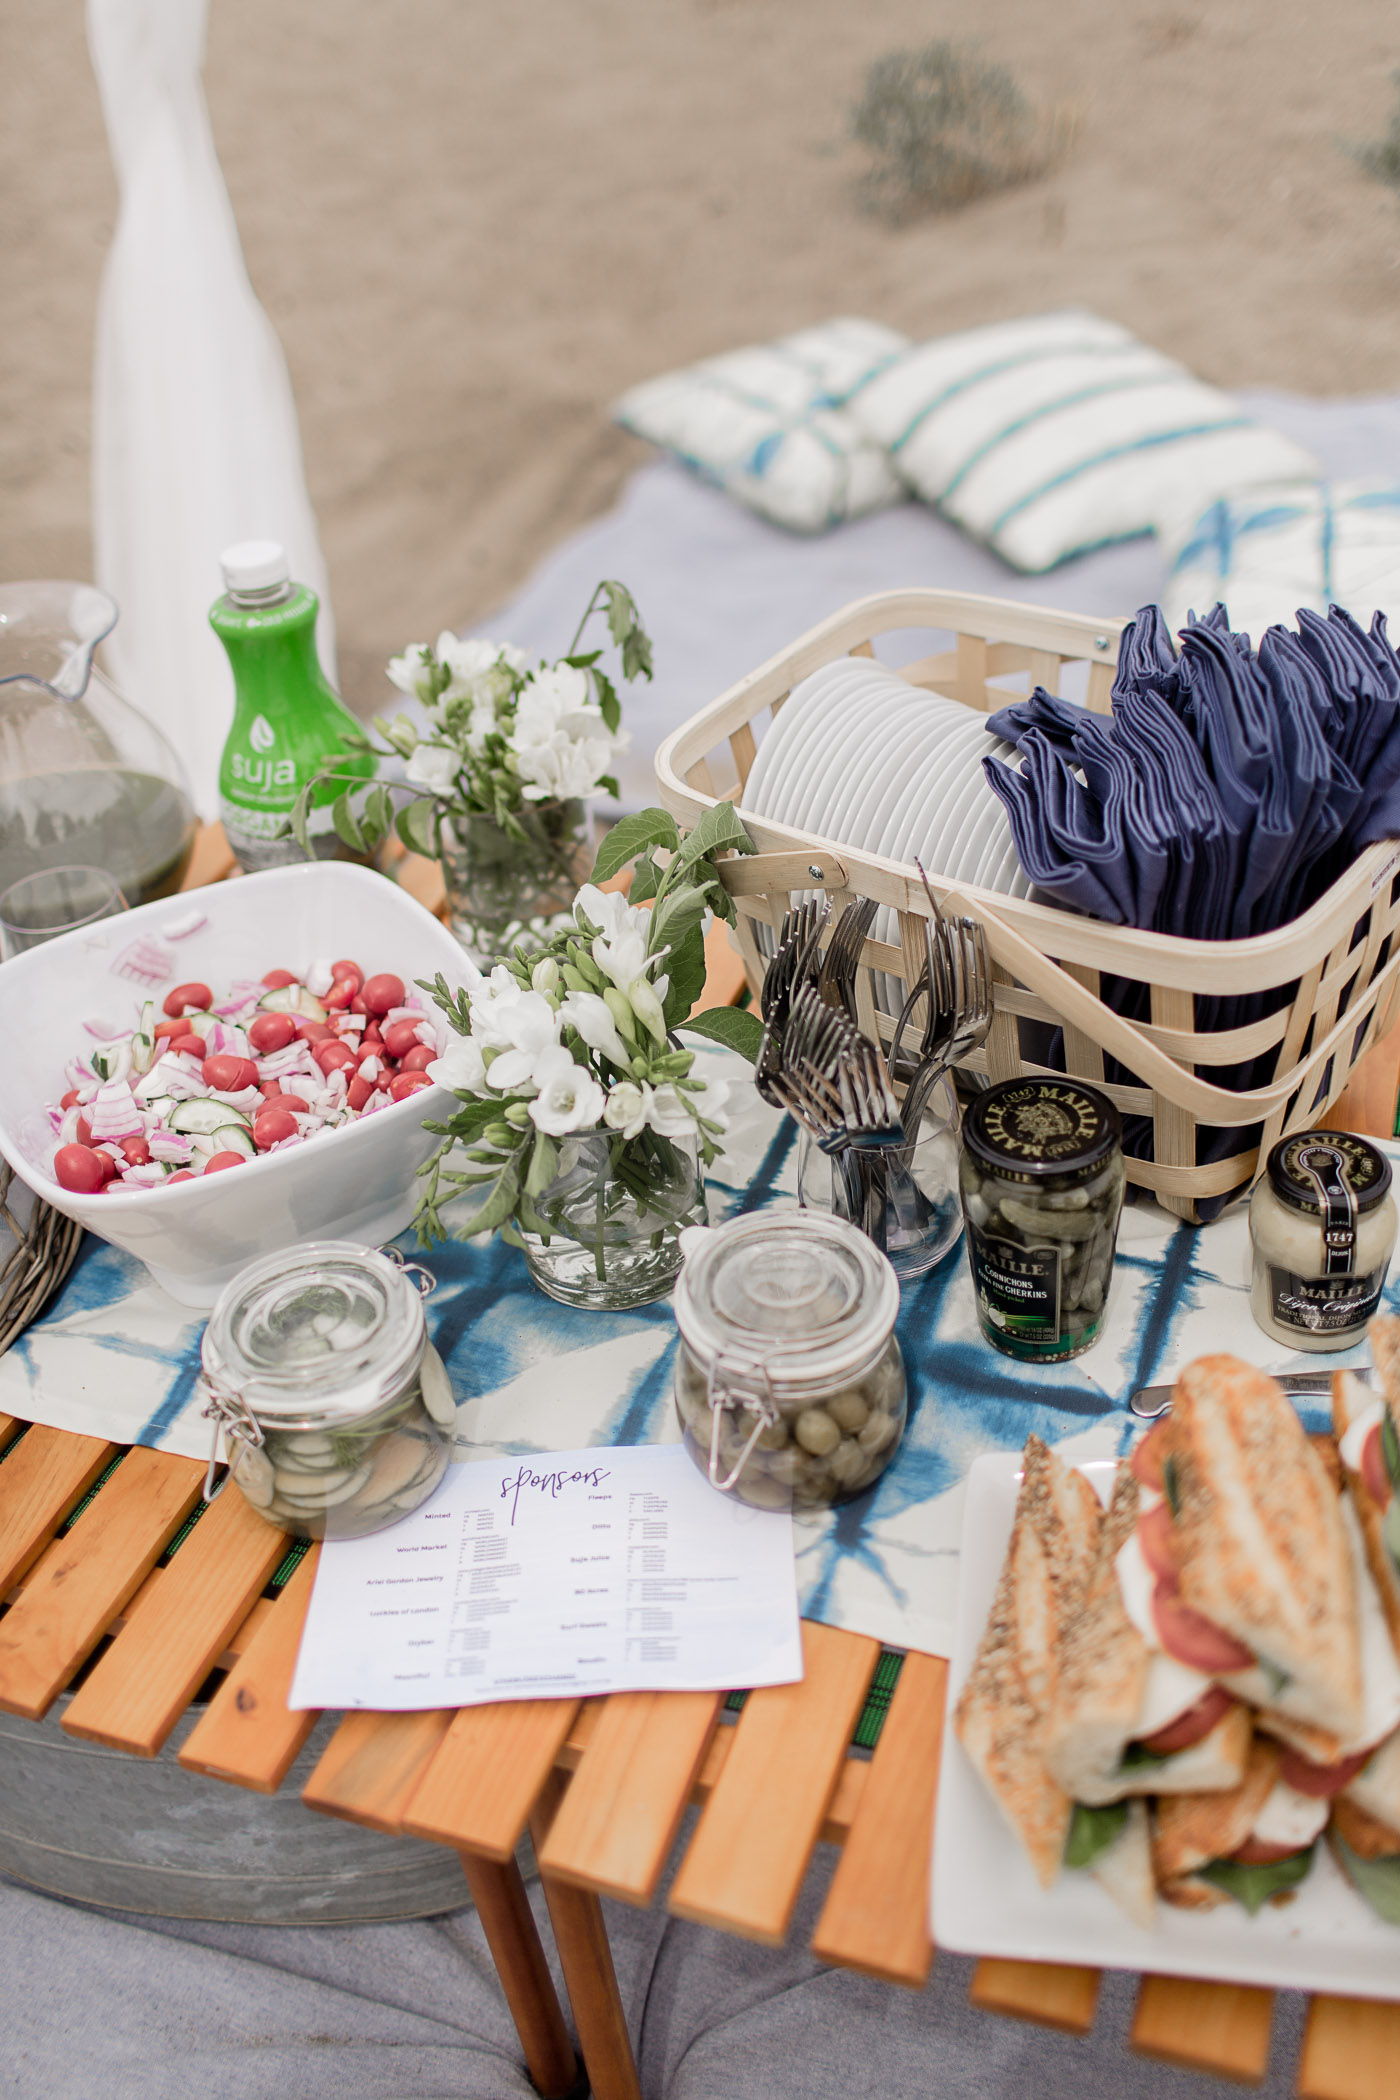 5 tips for throwing the perfect picnic party